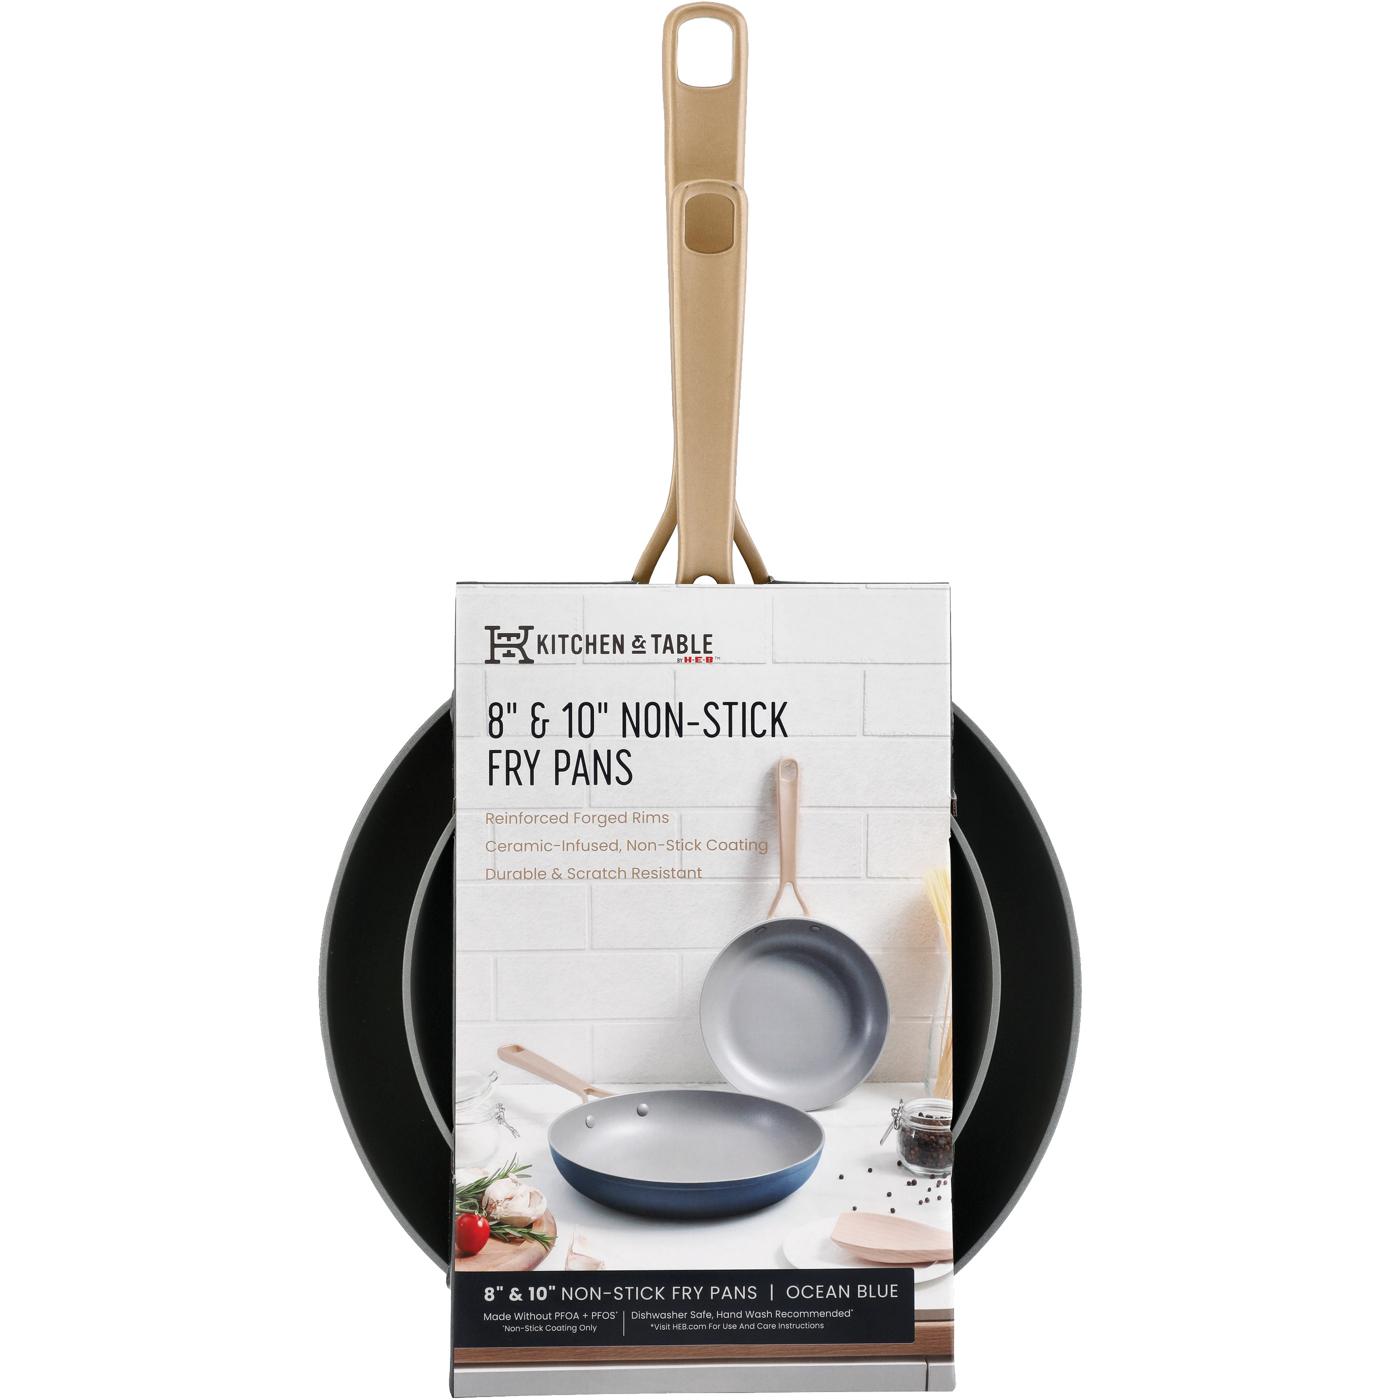 Kitchen & Table by H-E-B Non-Stick Fry Pans - Ocean Blue; image 2 of 3